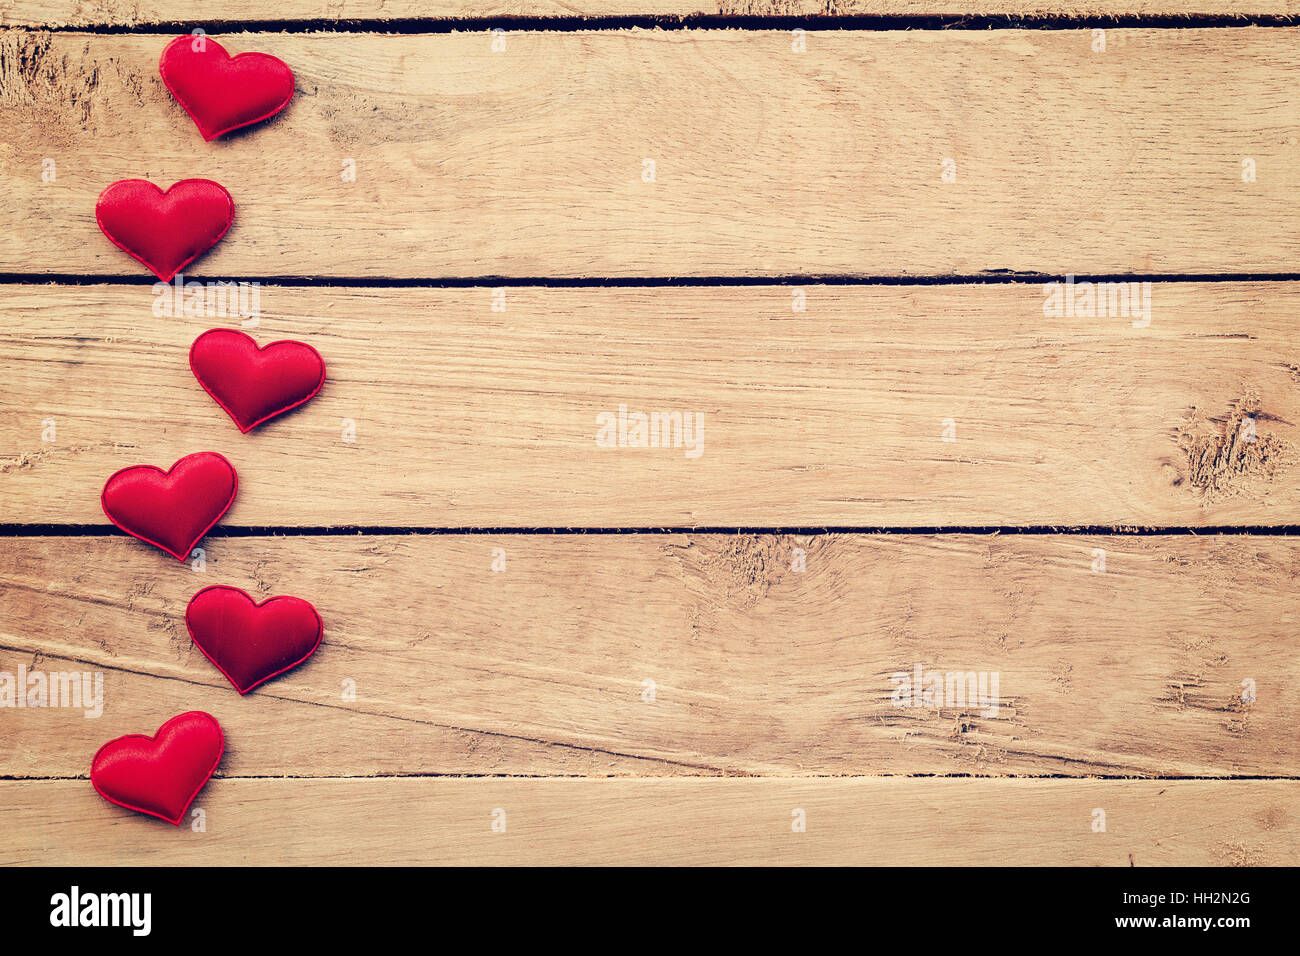 Red heart on wood background with space. vintage toned. Stock Photo